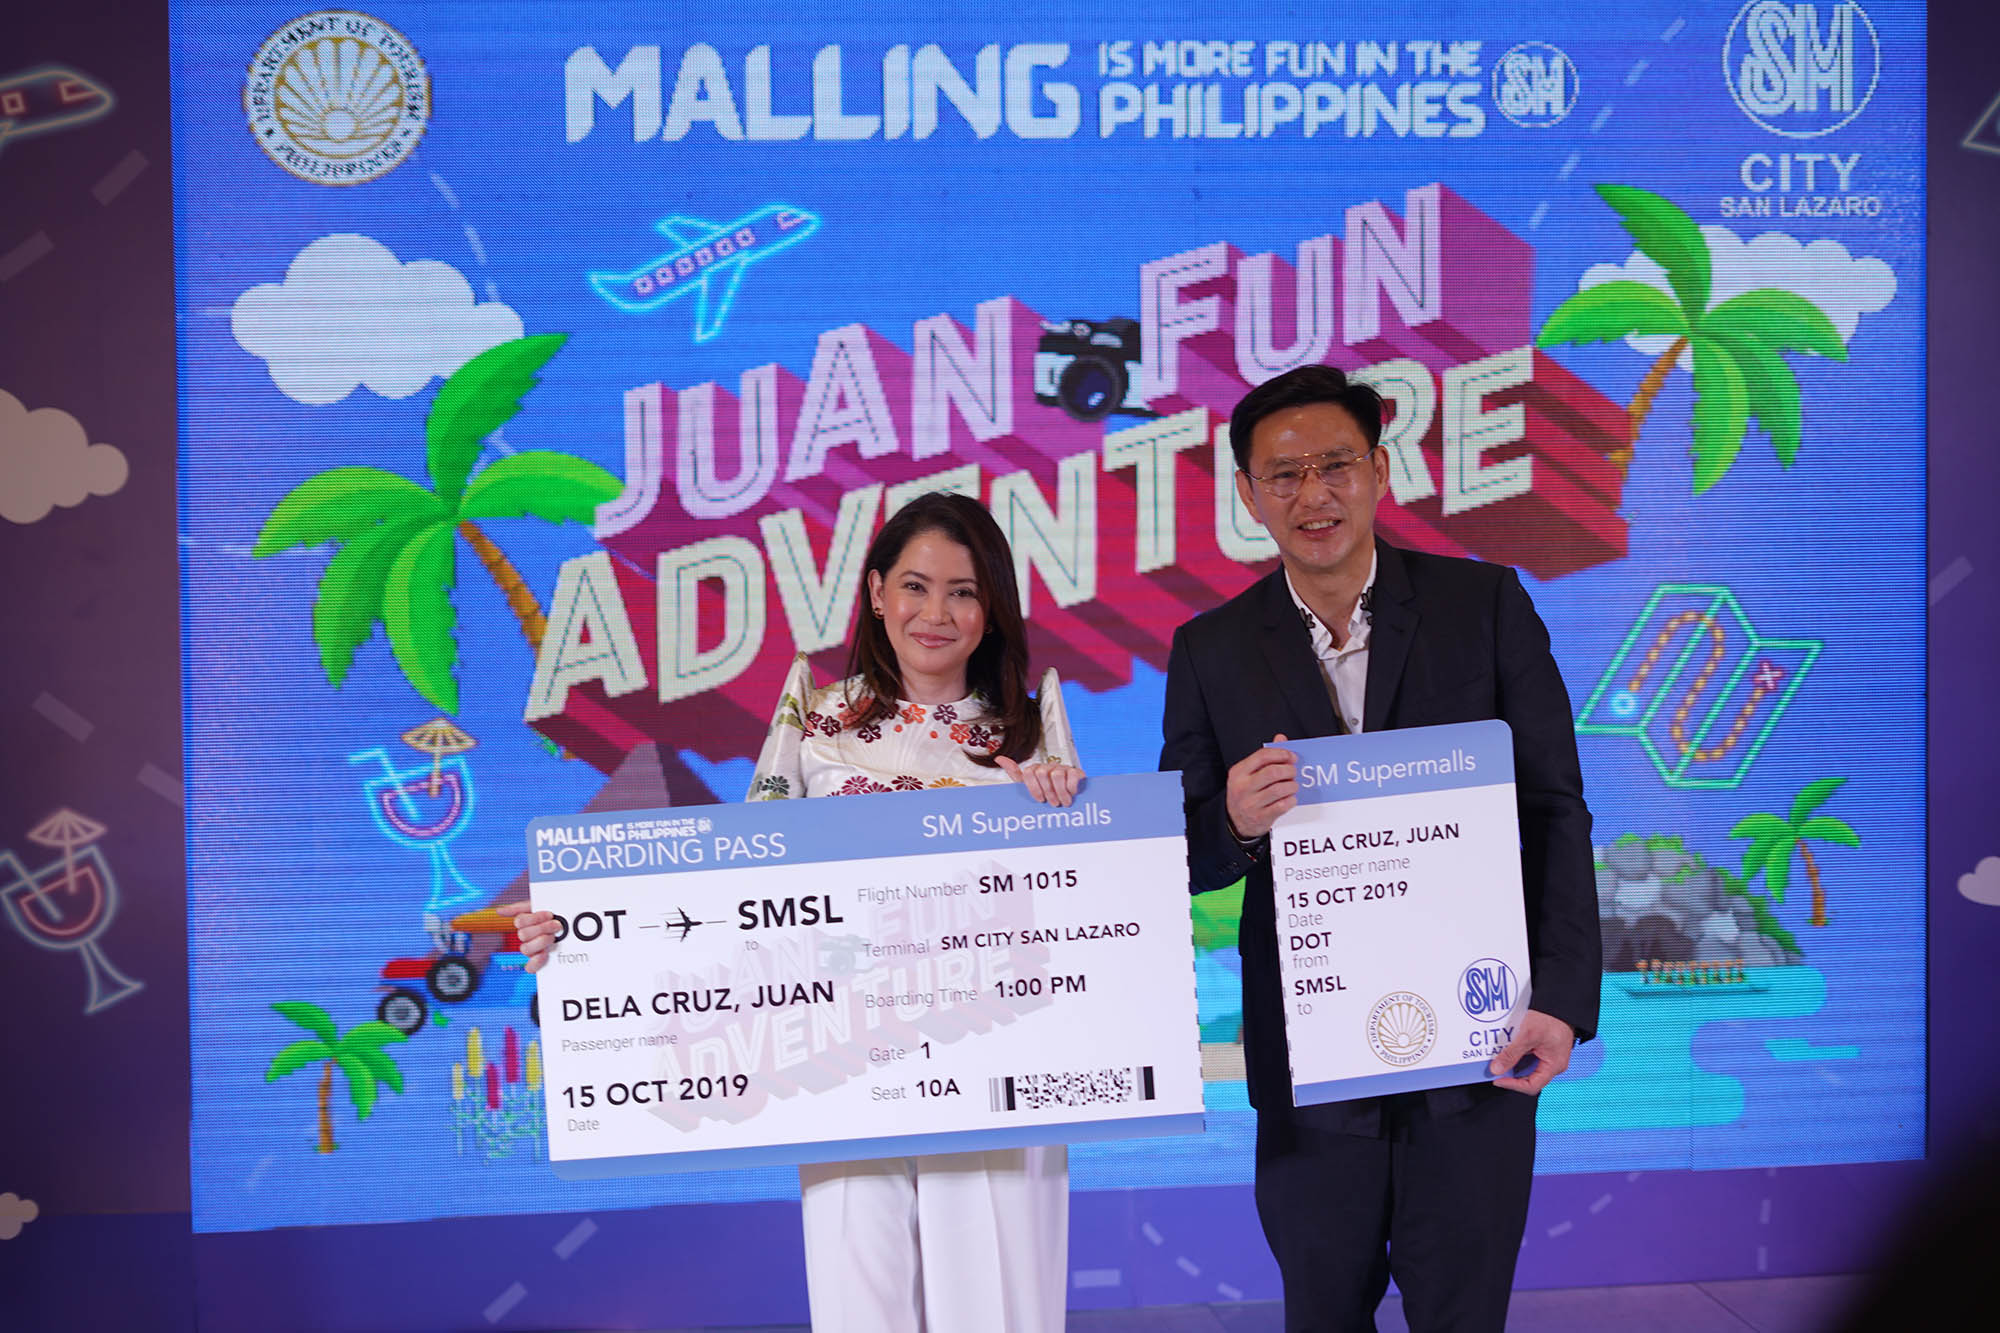 SM Supermalls and DOT partners to launch Juan Fun Adventure campaign